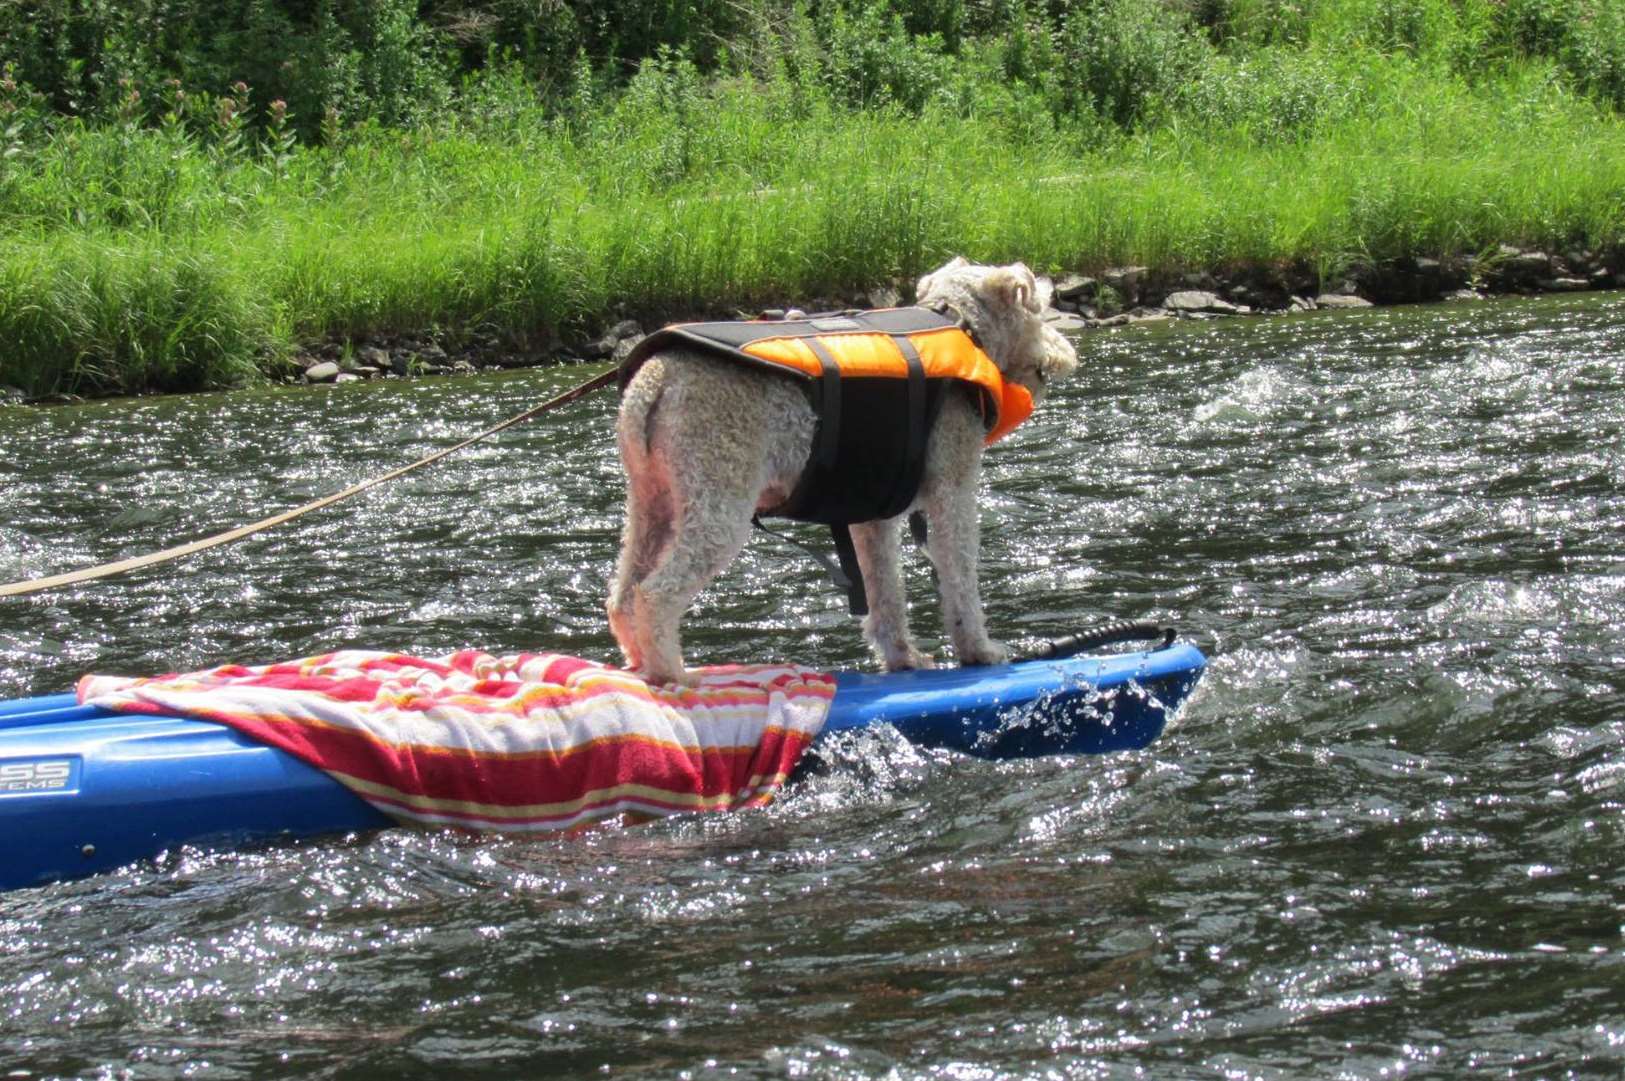 Sally Grist has been sent this picture of a Lakeland terrier balancing on a kayak for the Doglympics